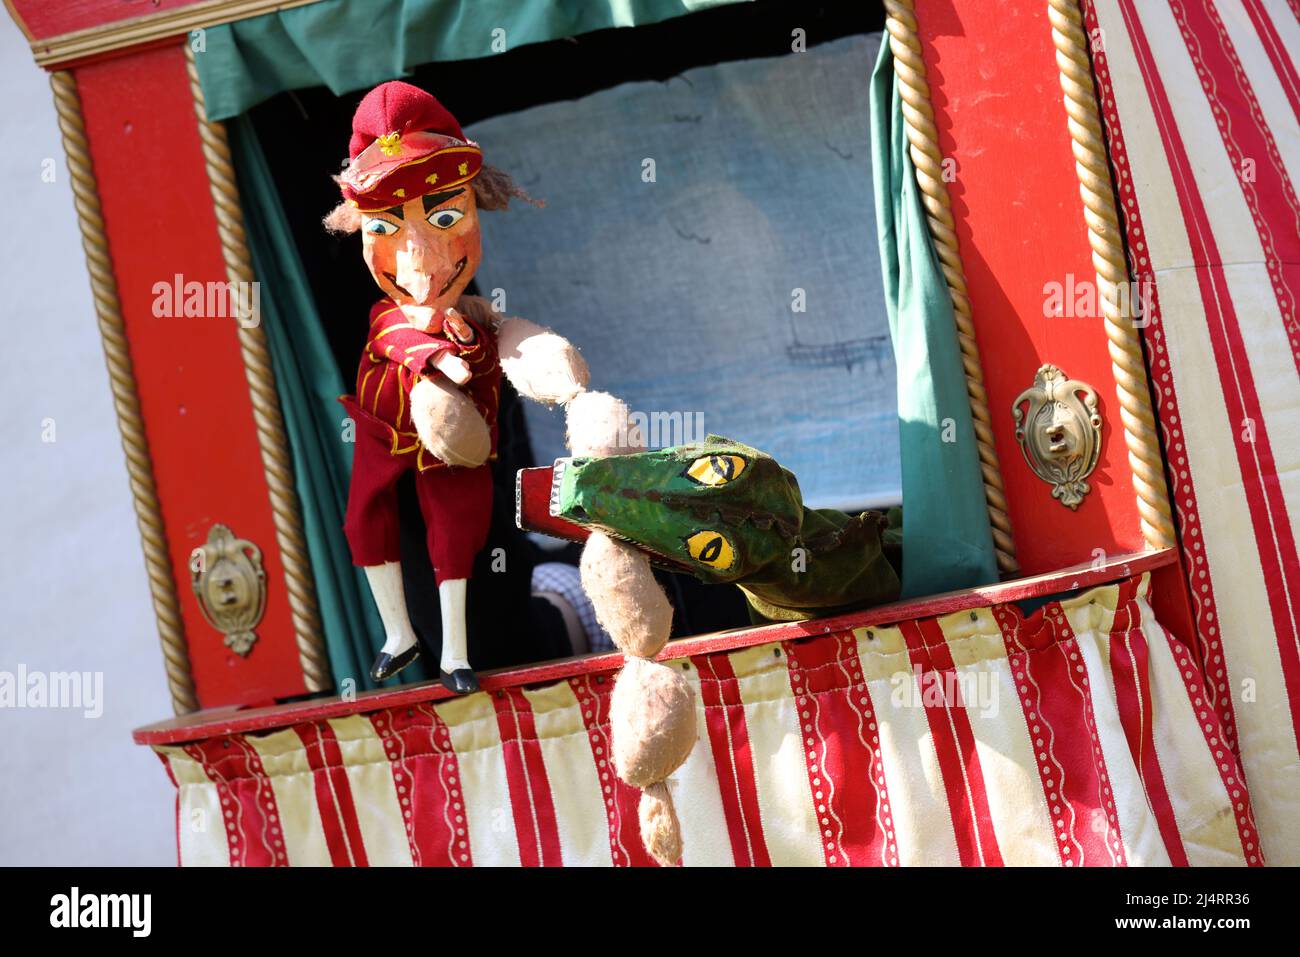 A Punch and Judy Show pictured taking place at the Weald & Downland Museum in Singleton, Chichester, West Sussex, UK. Stock Photo